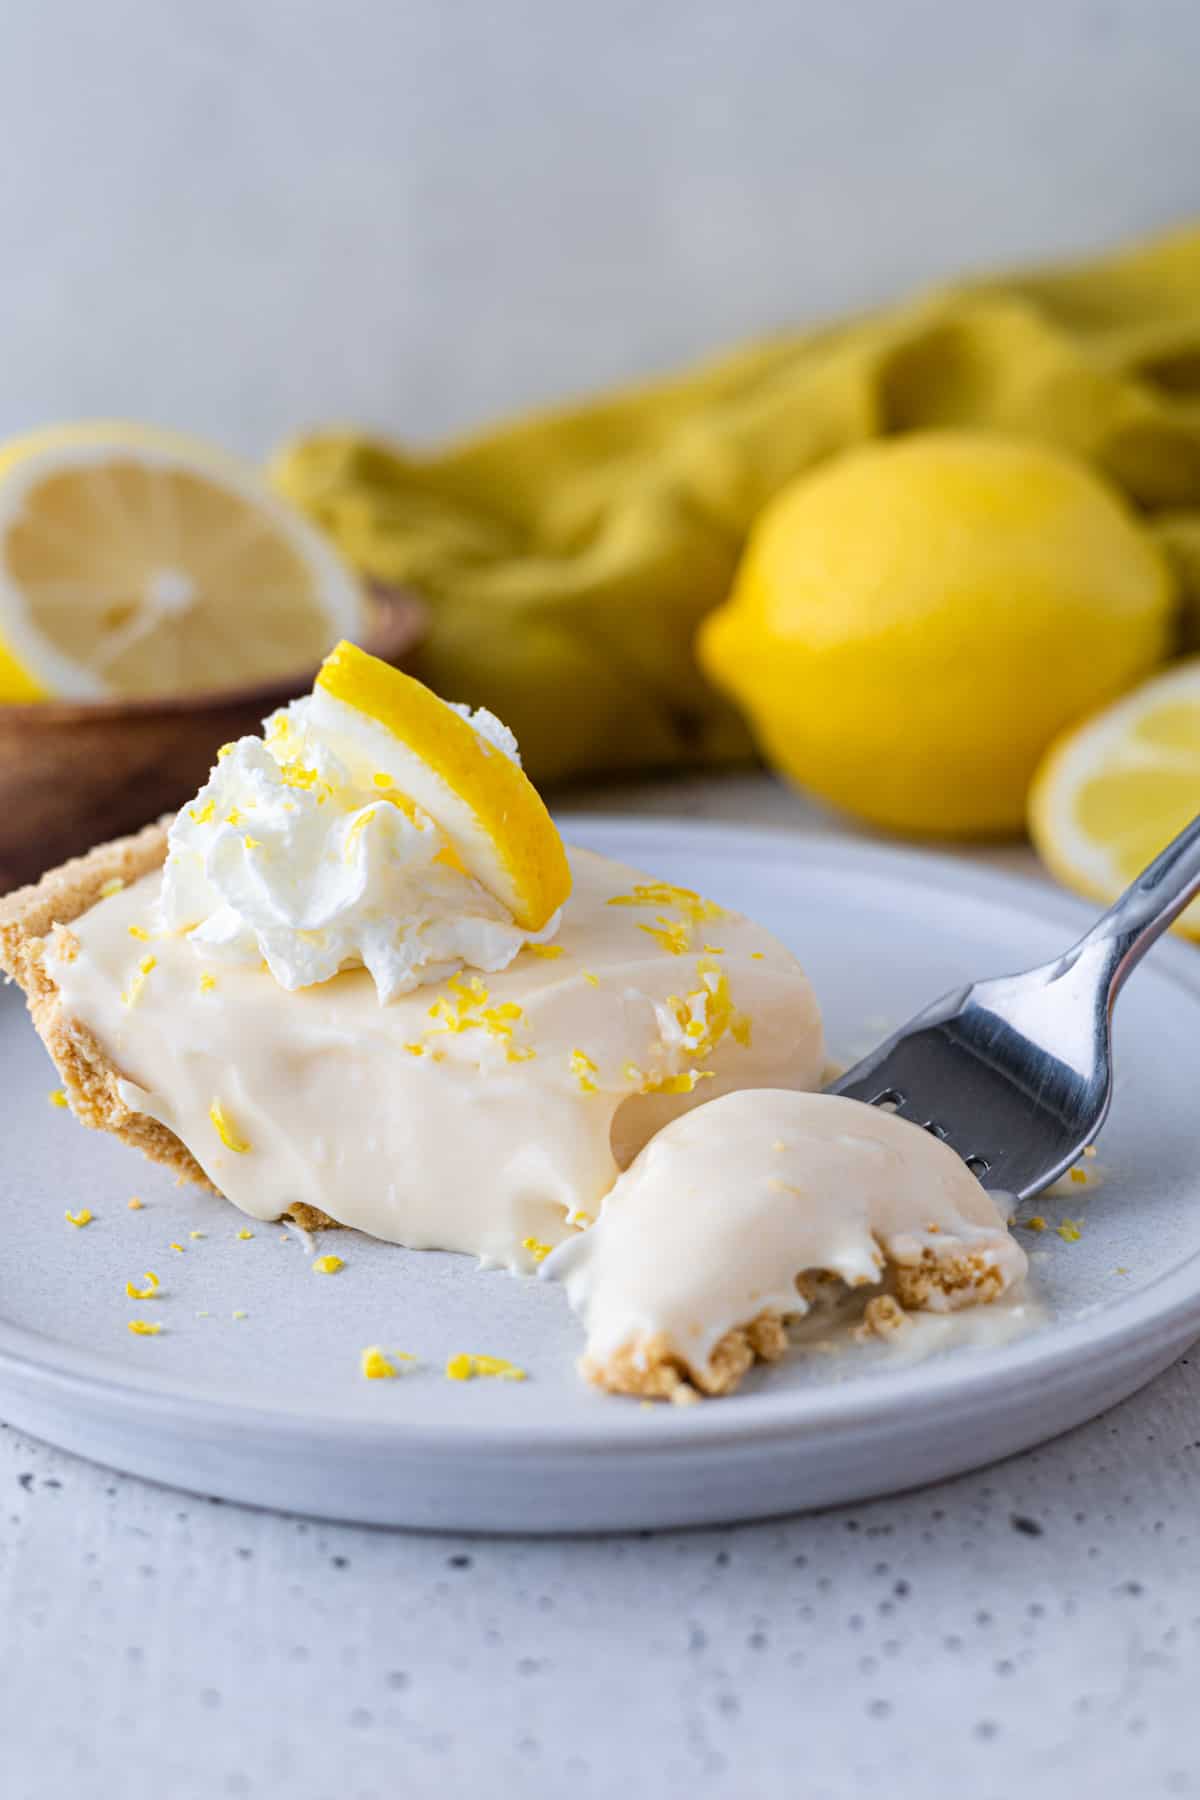 A slice of lemon pie with a bite taken out of it.